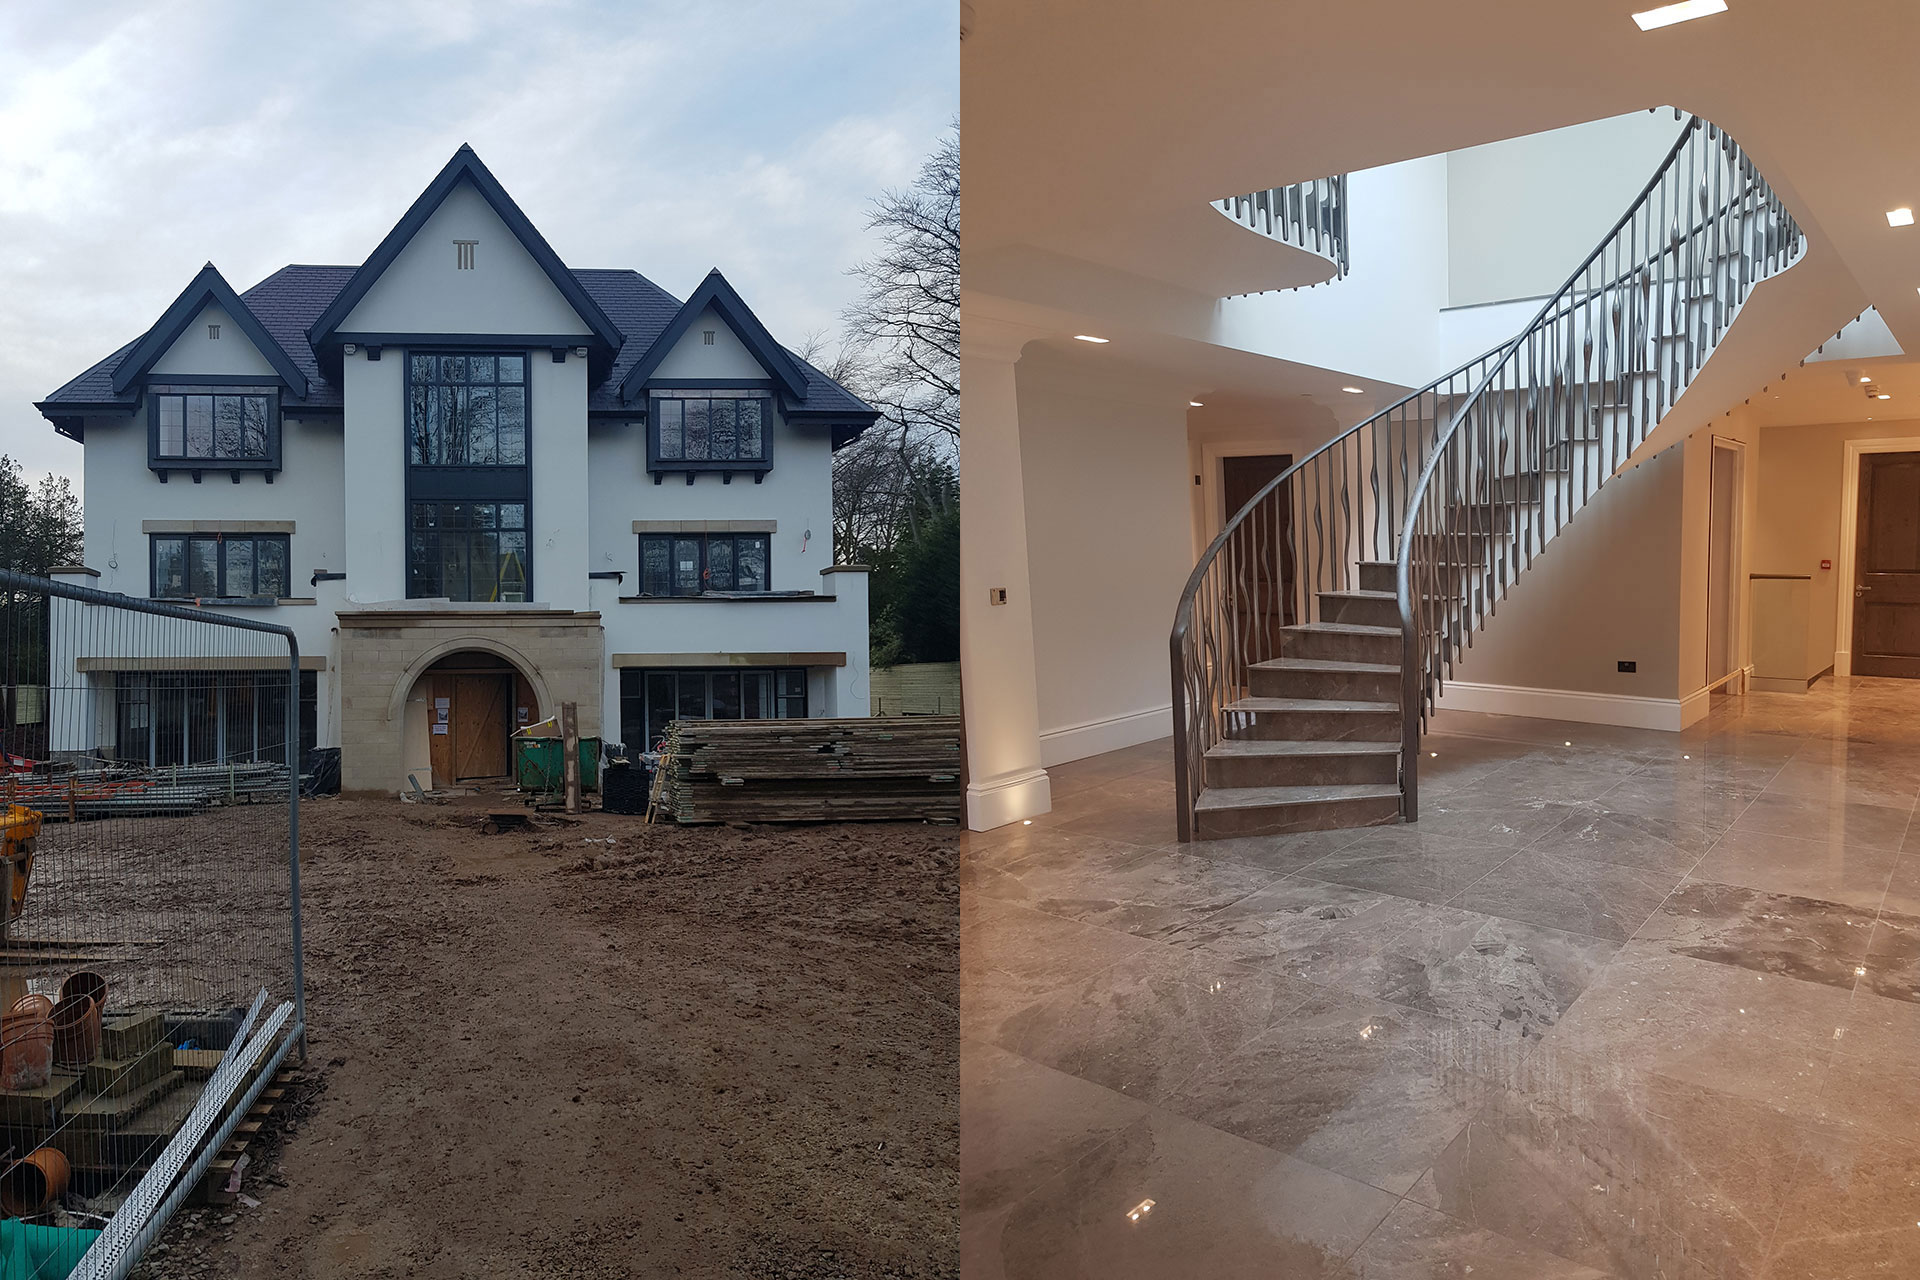 House and apartment builder in Hale, South Manchester